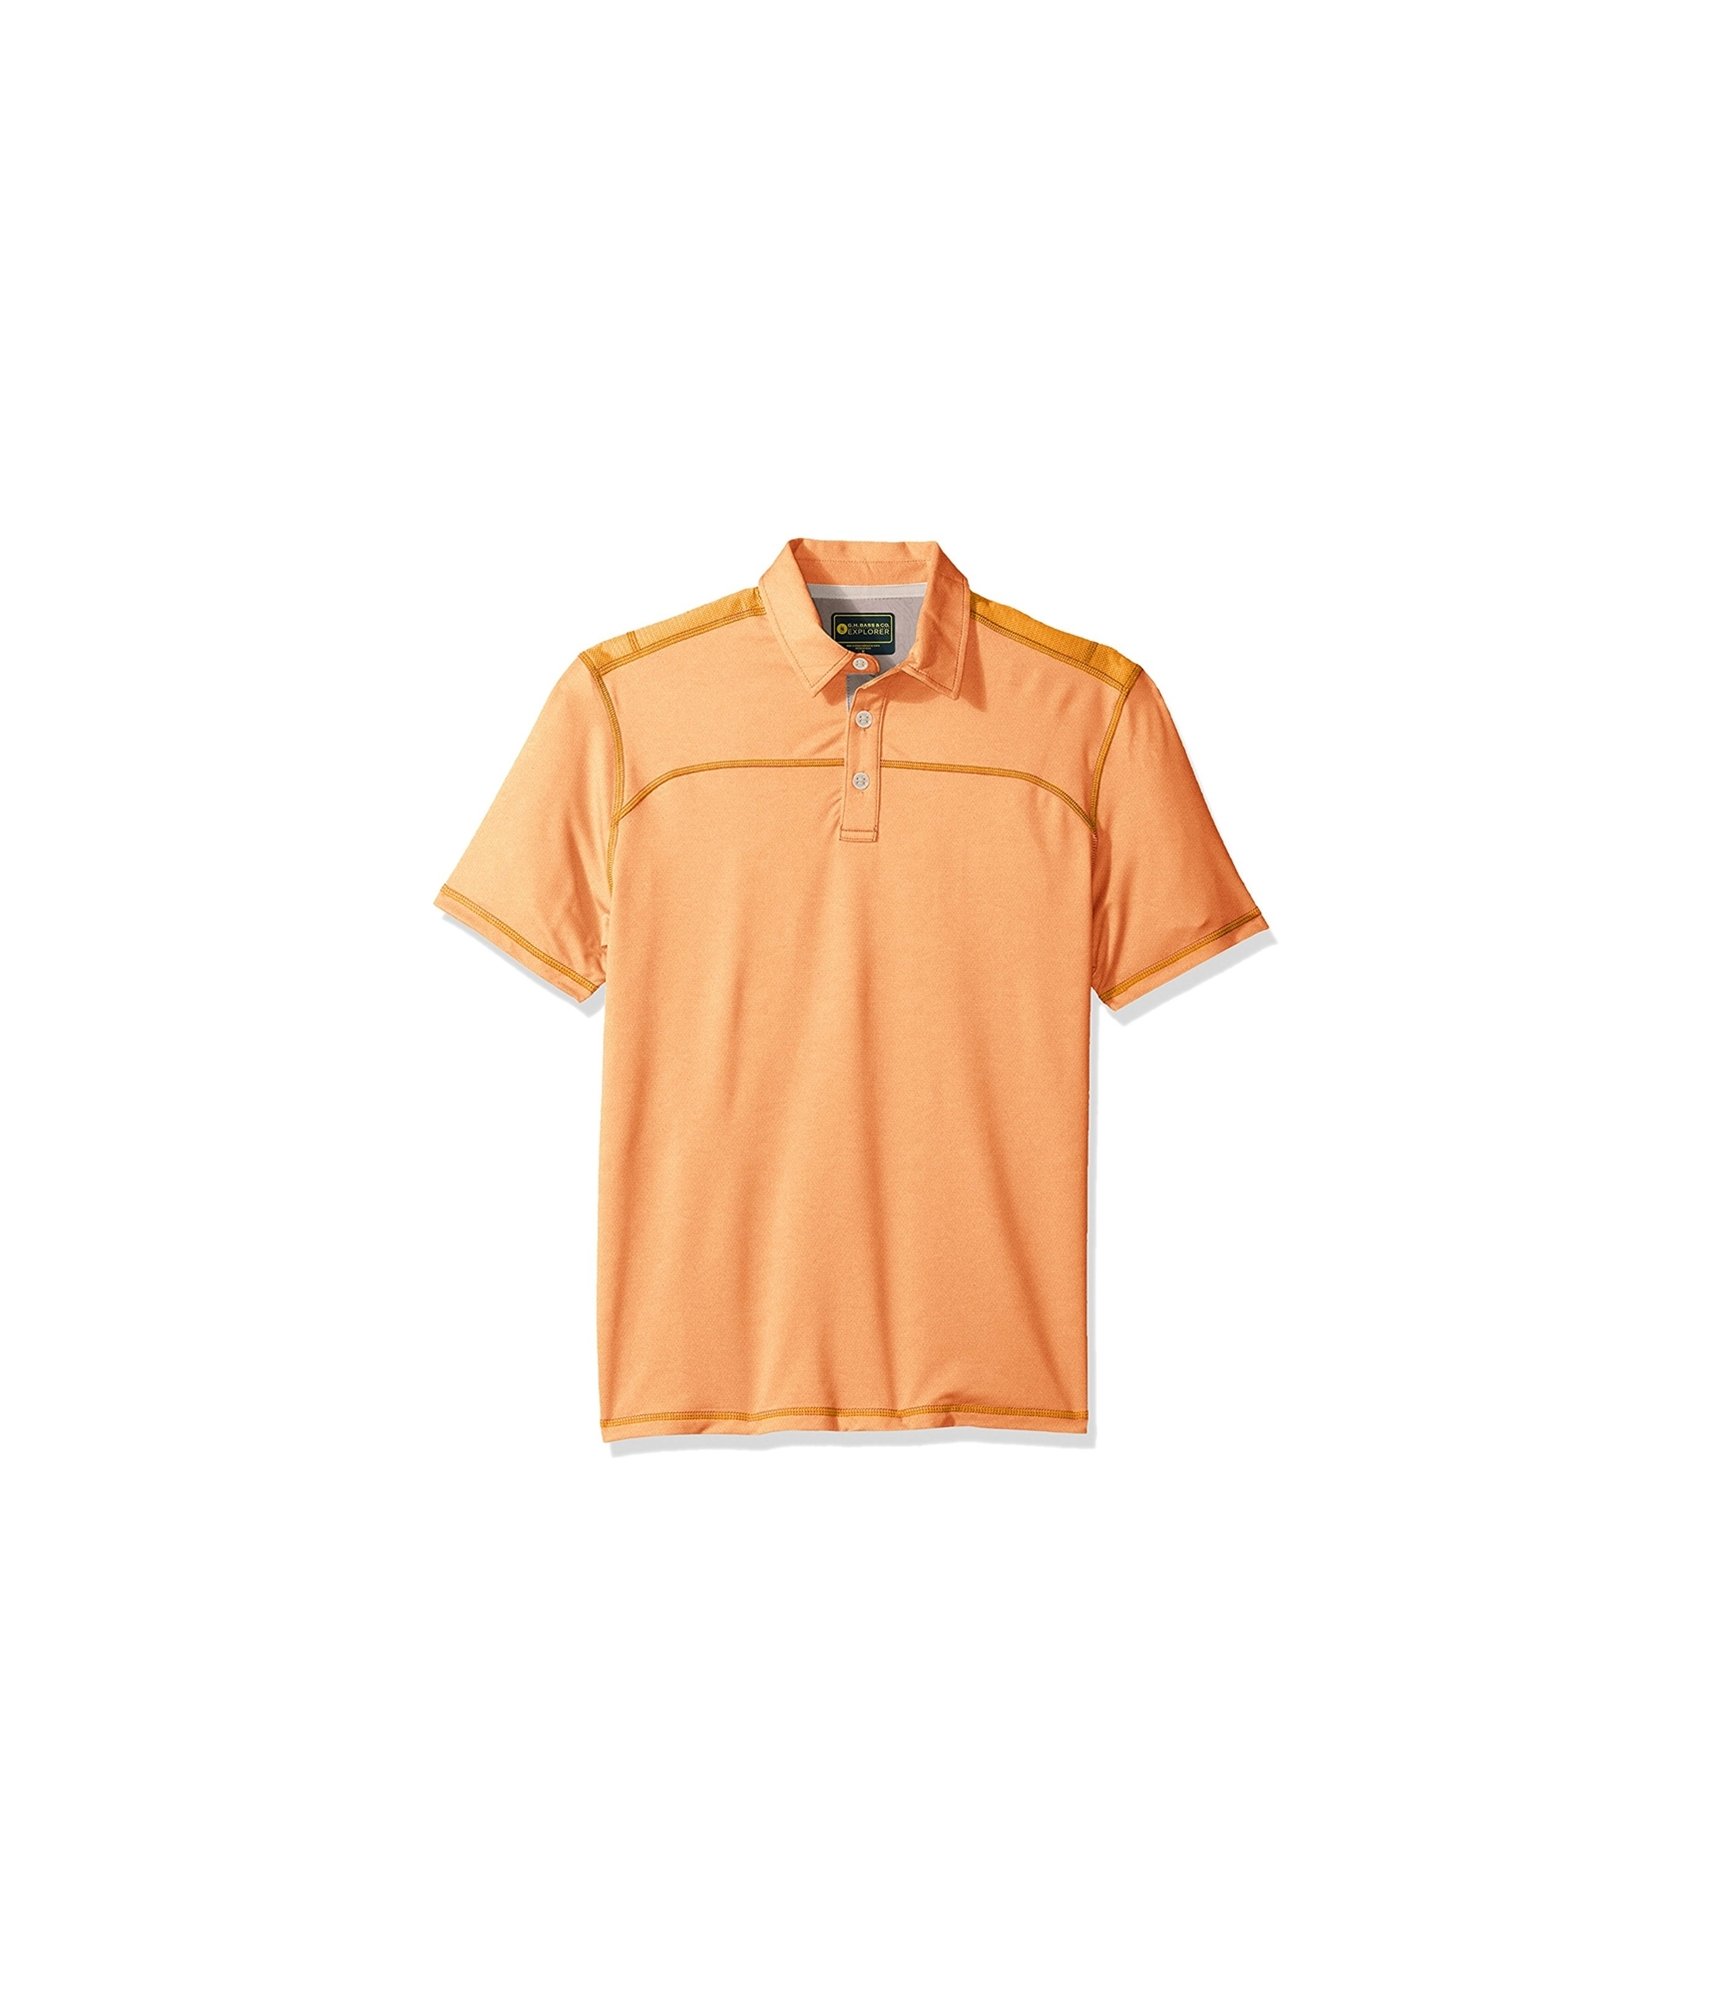 Buy a G.H. Bass & Co. Mens Pique Performance Rugby Polo Shirt